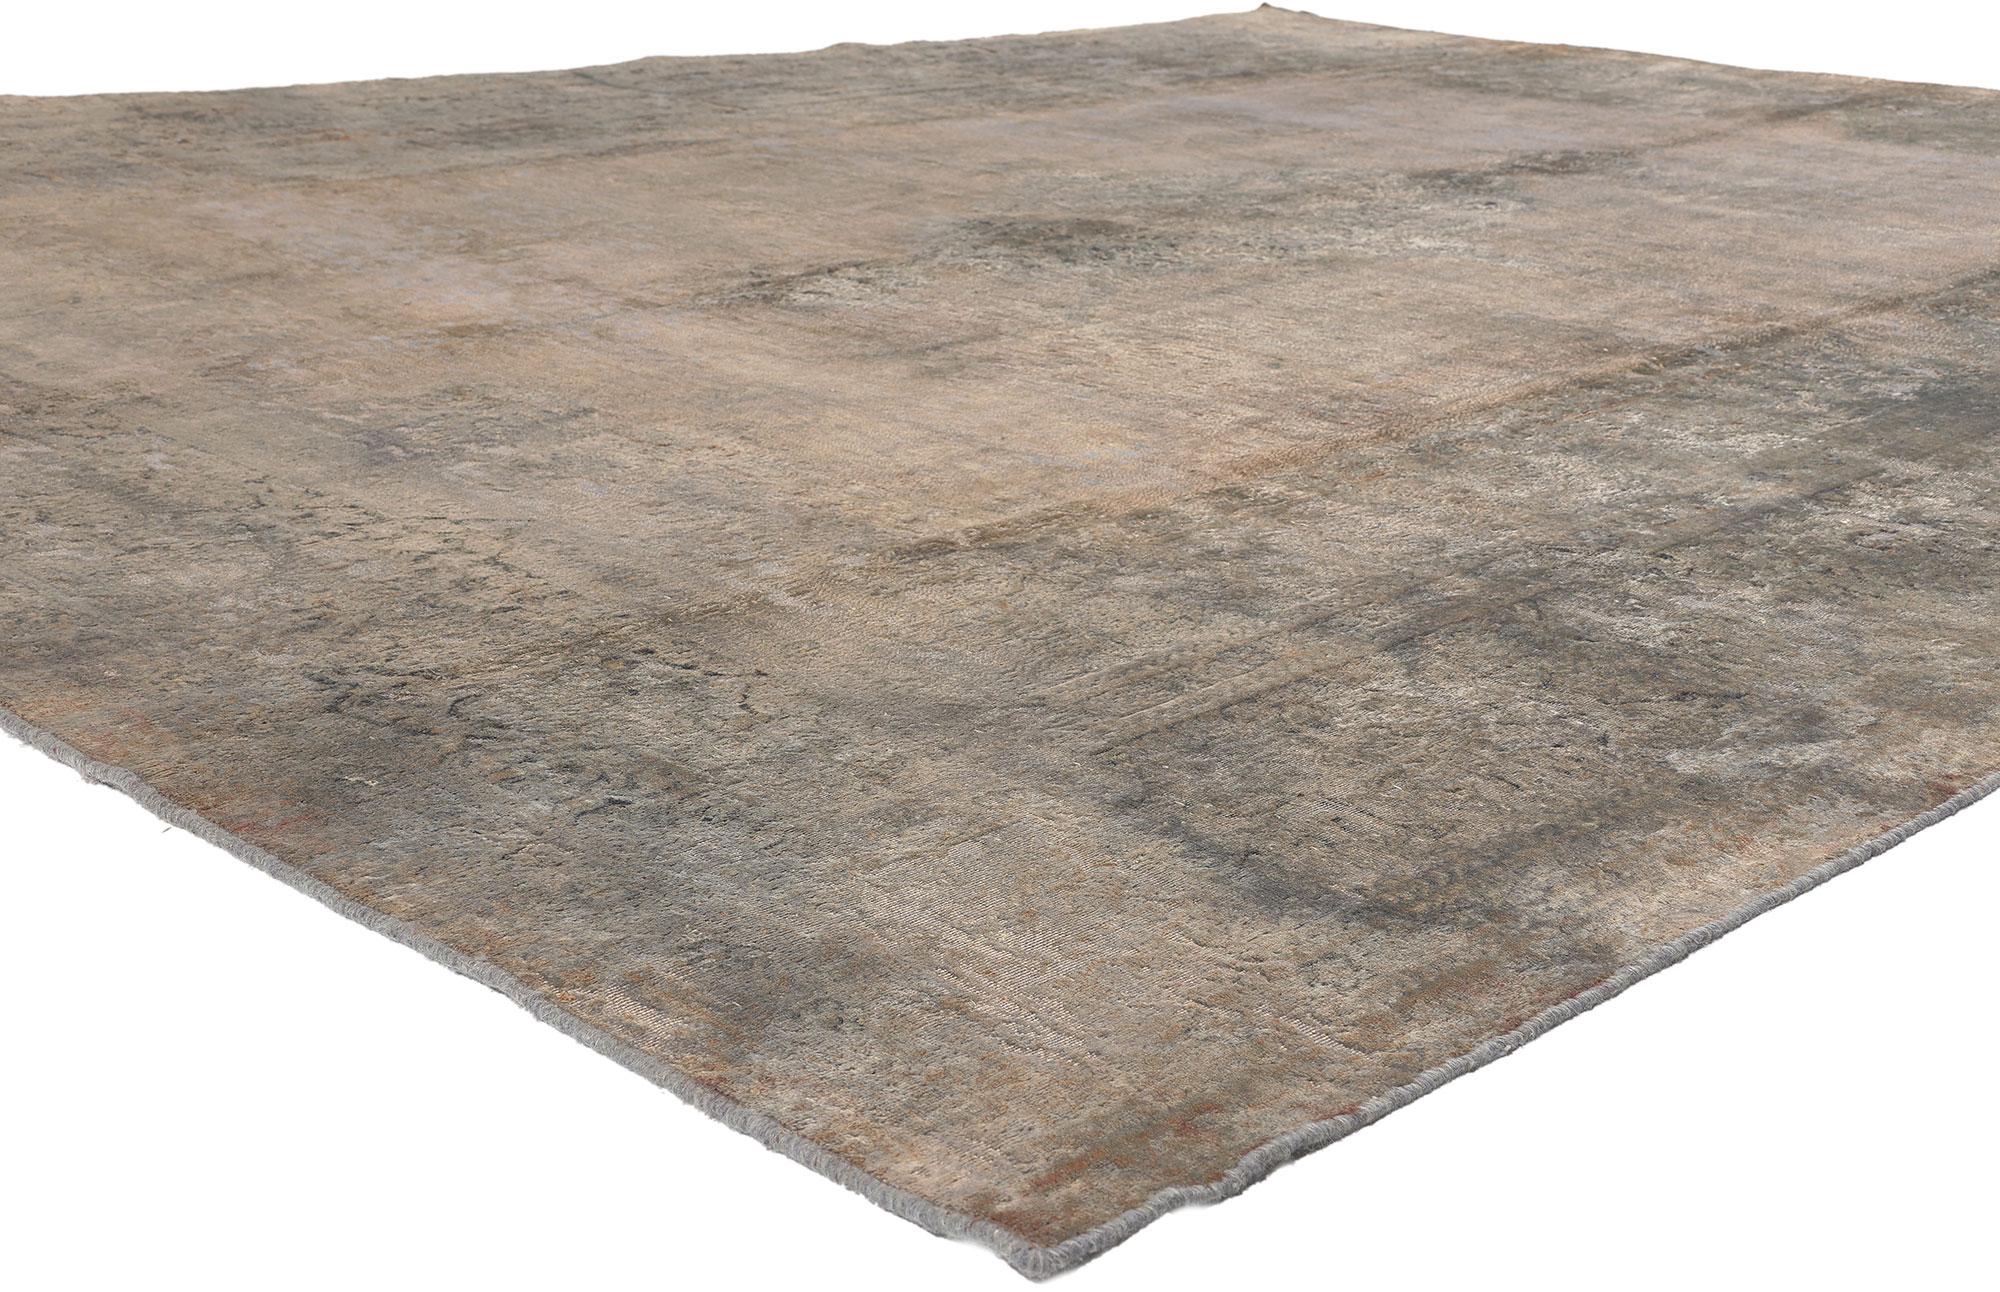 60616 Vintage Turkish Overdyed Rug, 09'10 x 12'11. 
Luxe utilitarian appeal meets industrial chic in this hand knotted wool vintage Turkish overdyed rug. The faded botanical design and earthy hues in this piece work together resulting in a look of